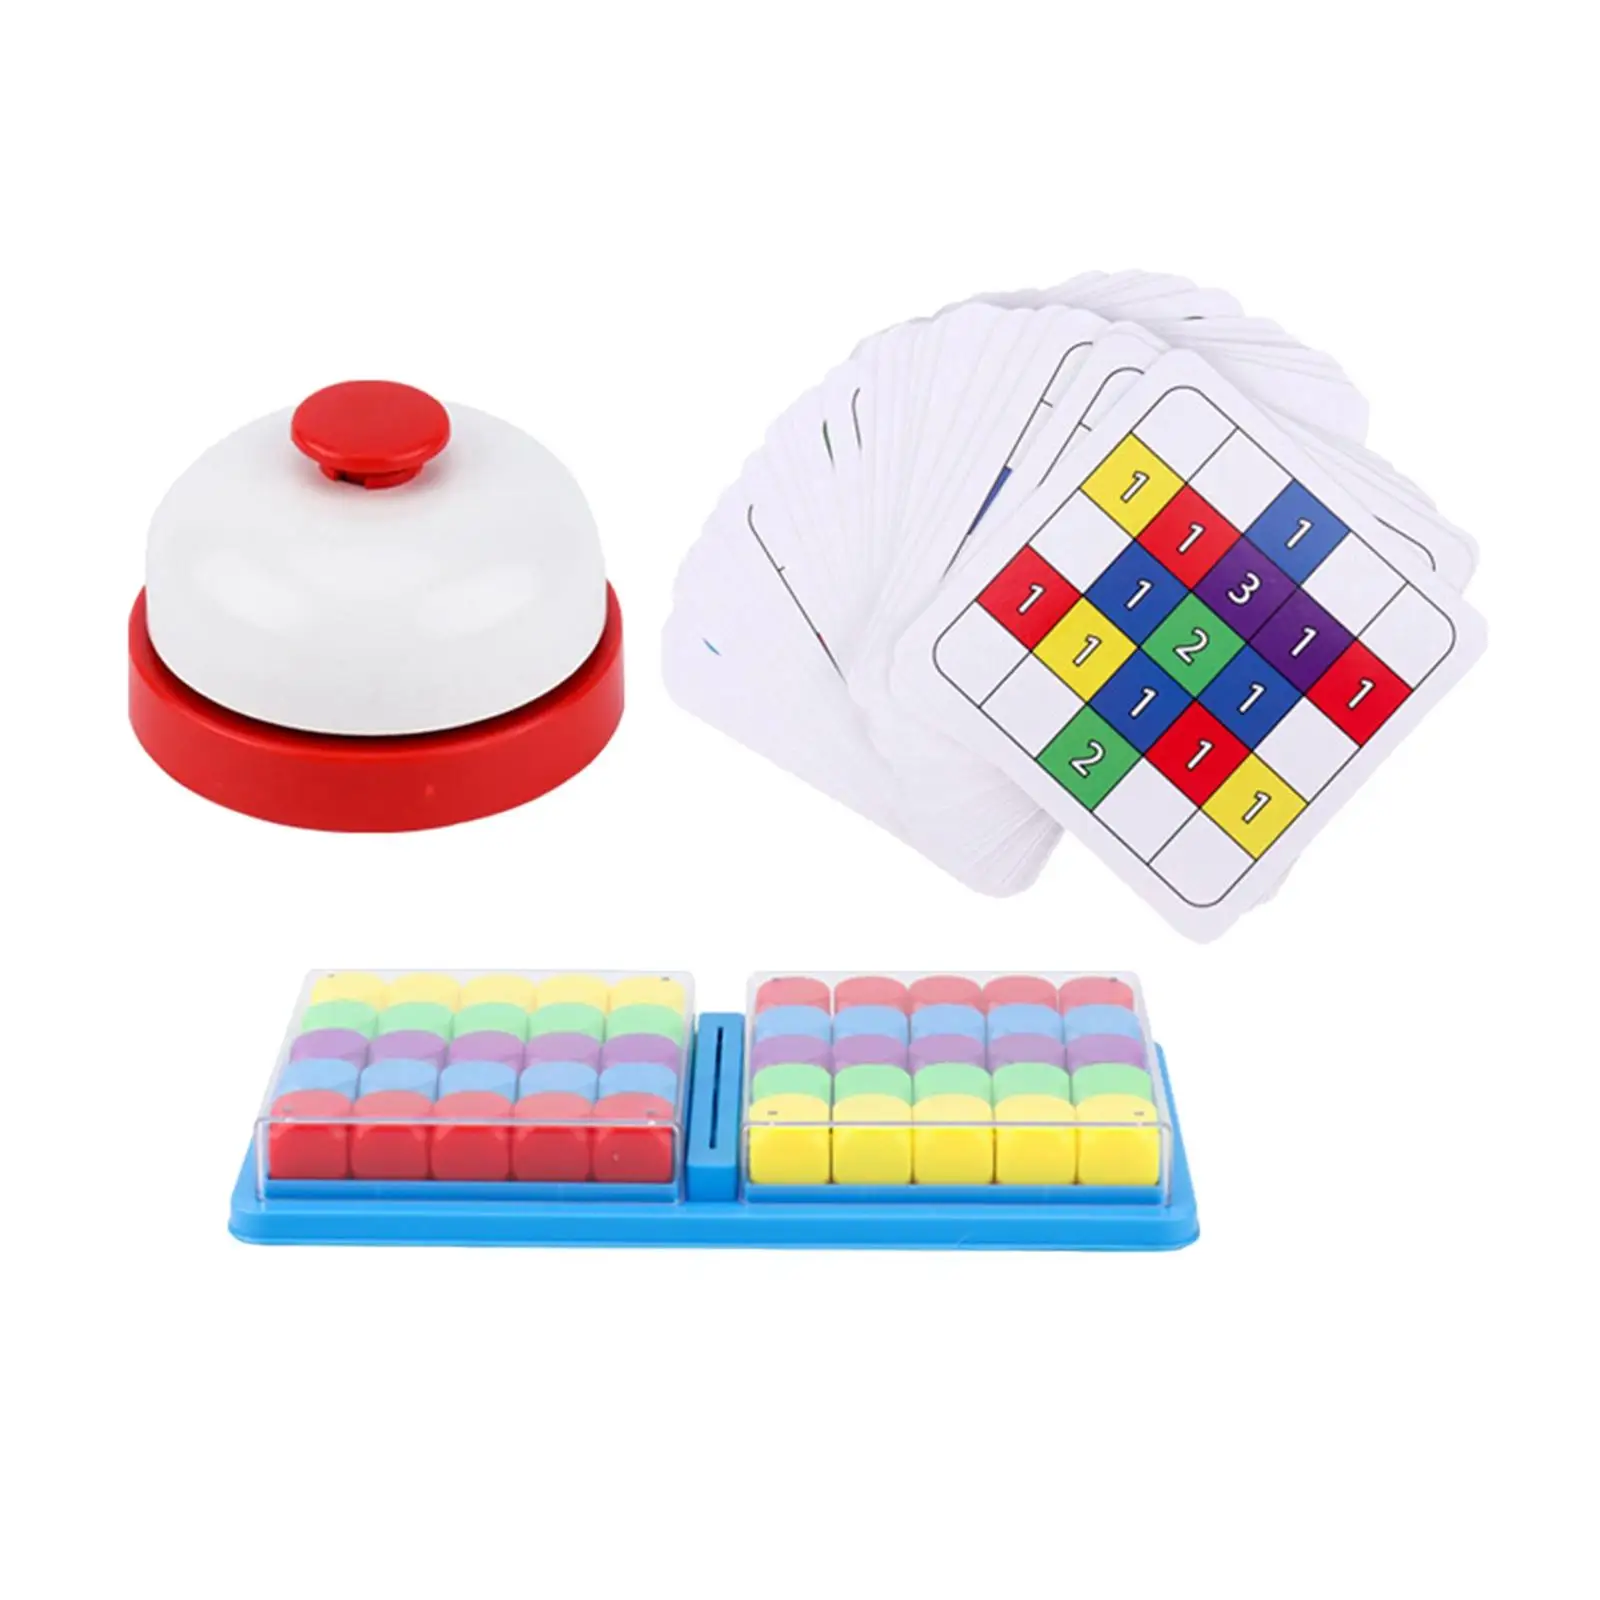 Classic Race Game Flexible Interesting Colorful Block Game for Game Activity Travel